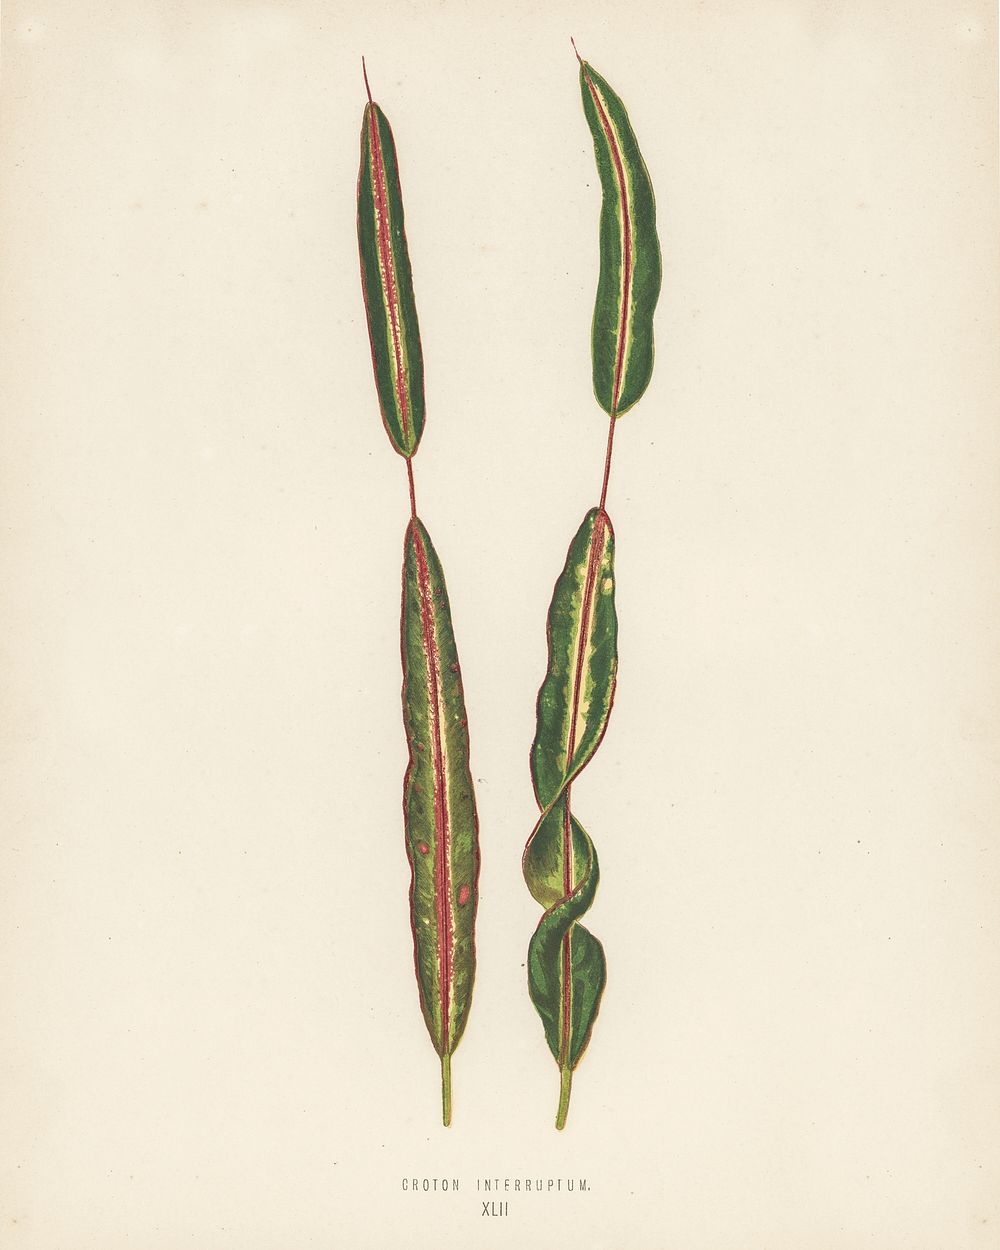 Croton interuptum. Digitally enhanced from our own 1929 edition of New and Rare Beautiful-Leaved Plants by Benjamin Fawcett…